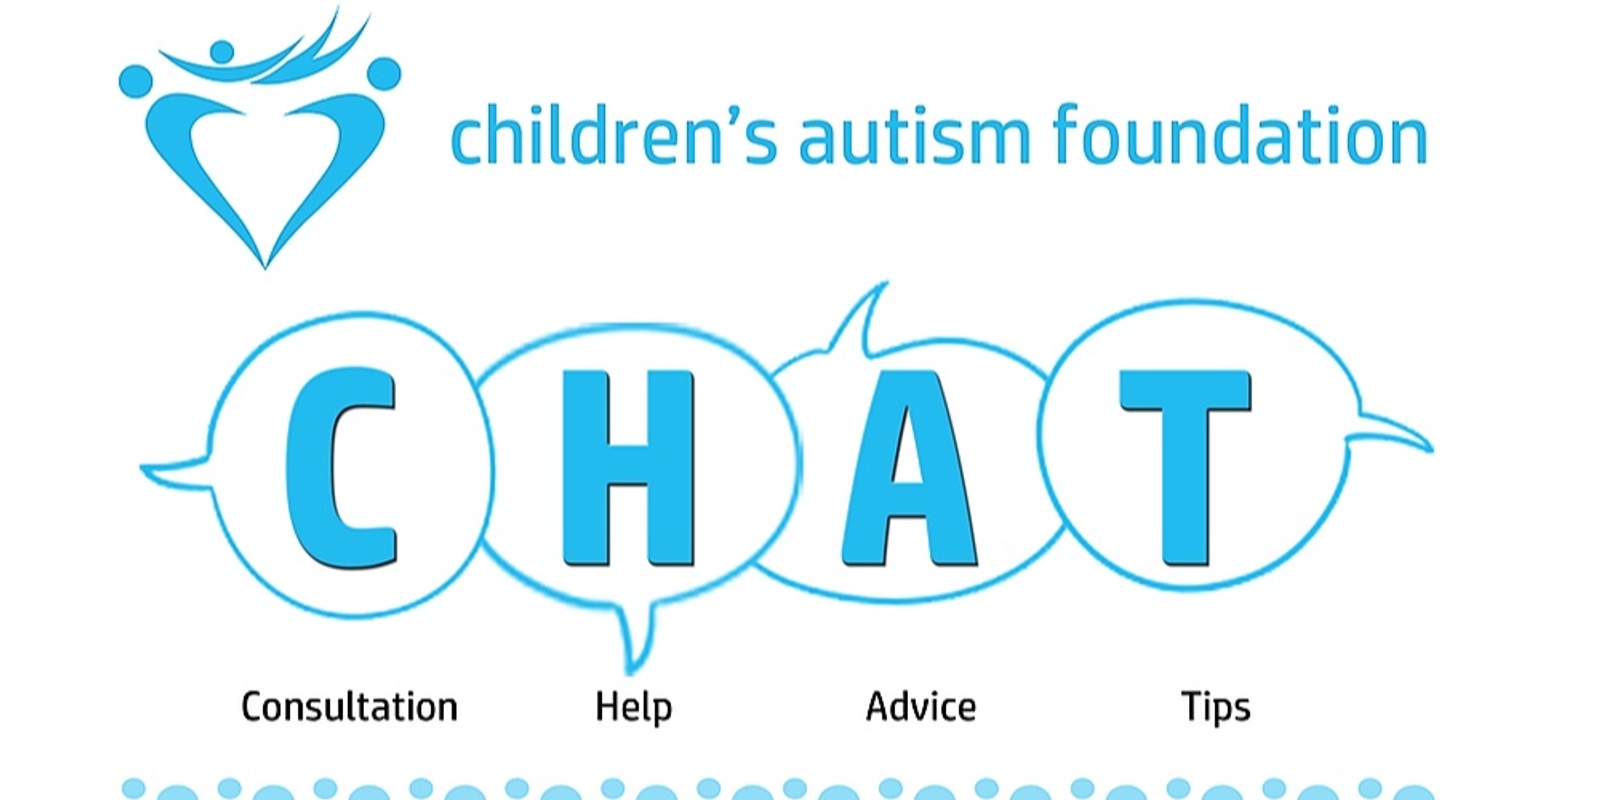 Banner image for Autism CHAT Session - East Auckland